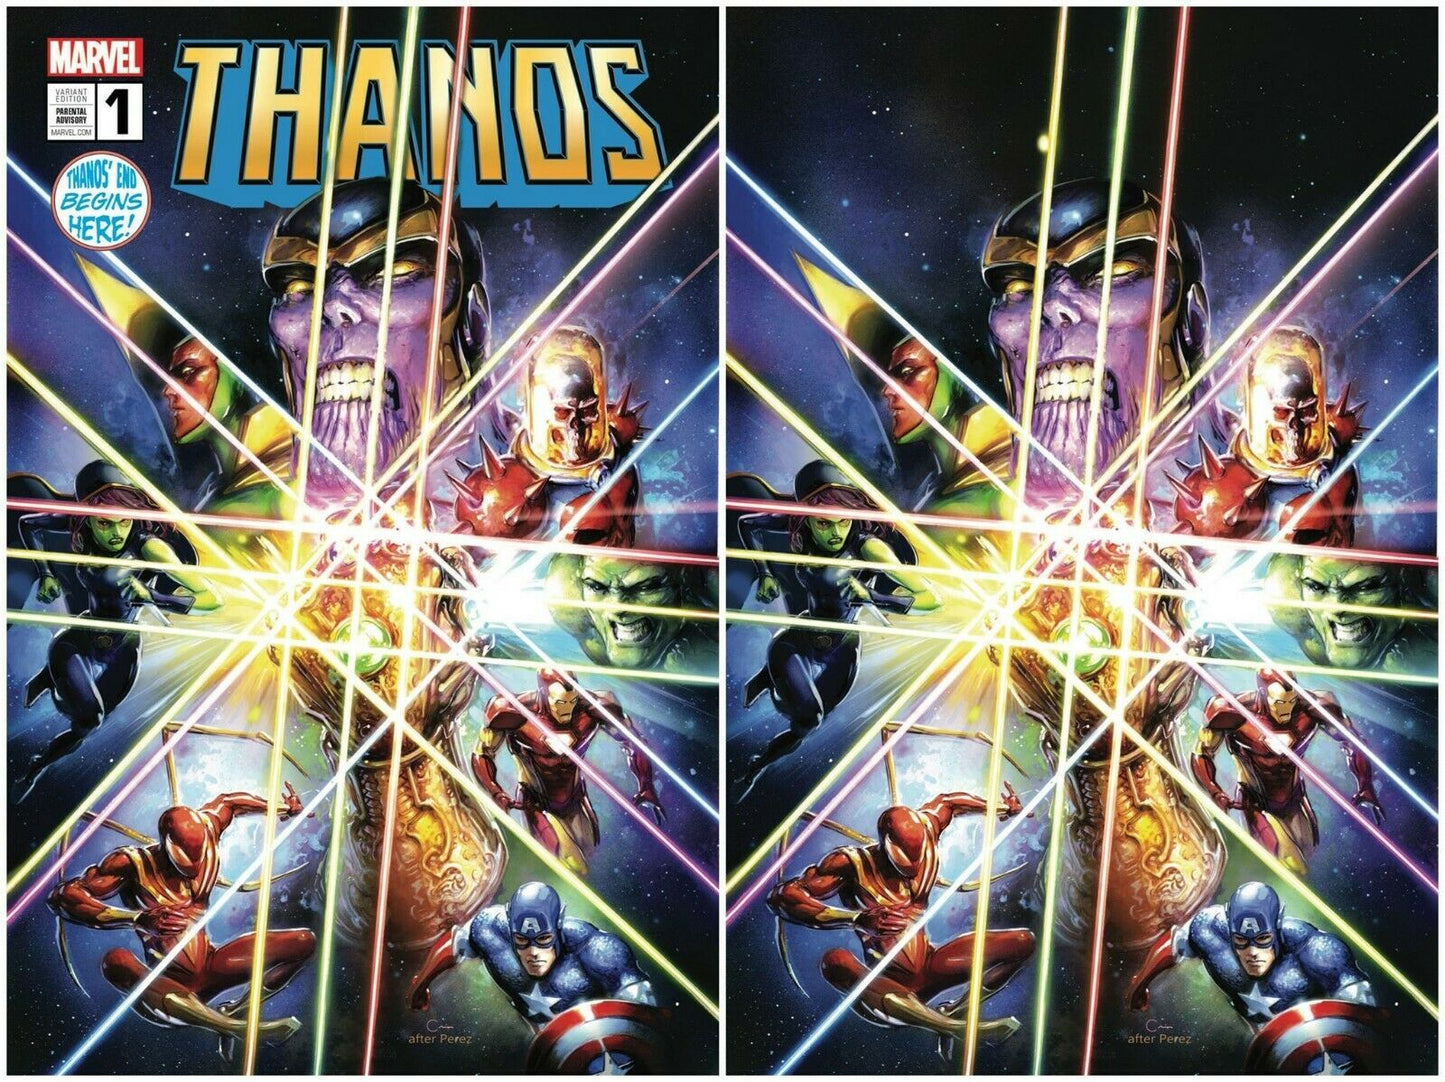 THANOS #1 CLAYTON CRAIN INFINITY GAUNTLET HOMAGE VARIANT COVER OPTIONS